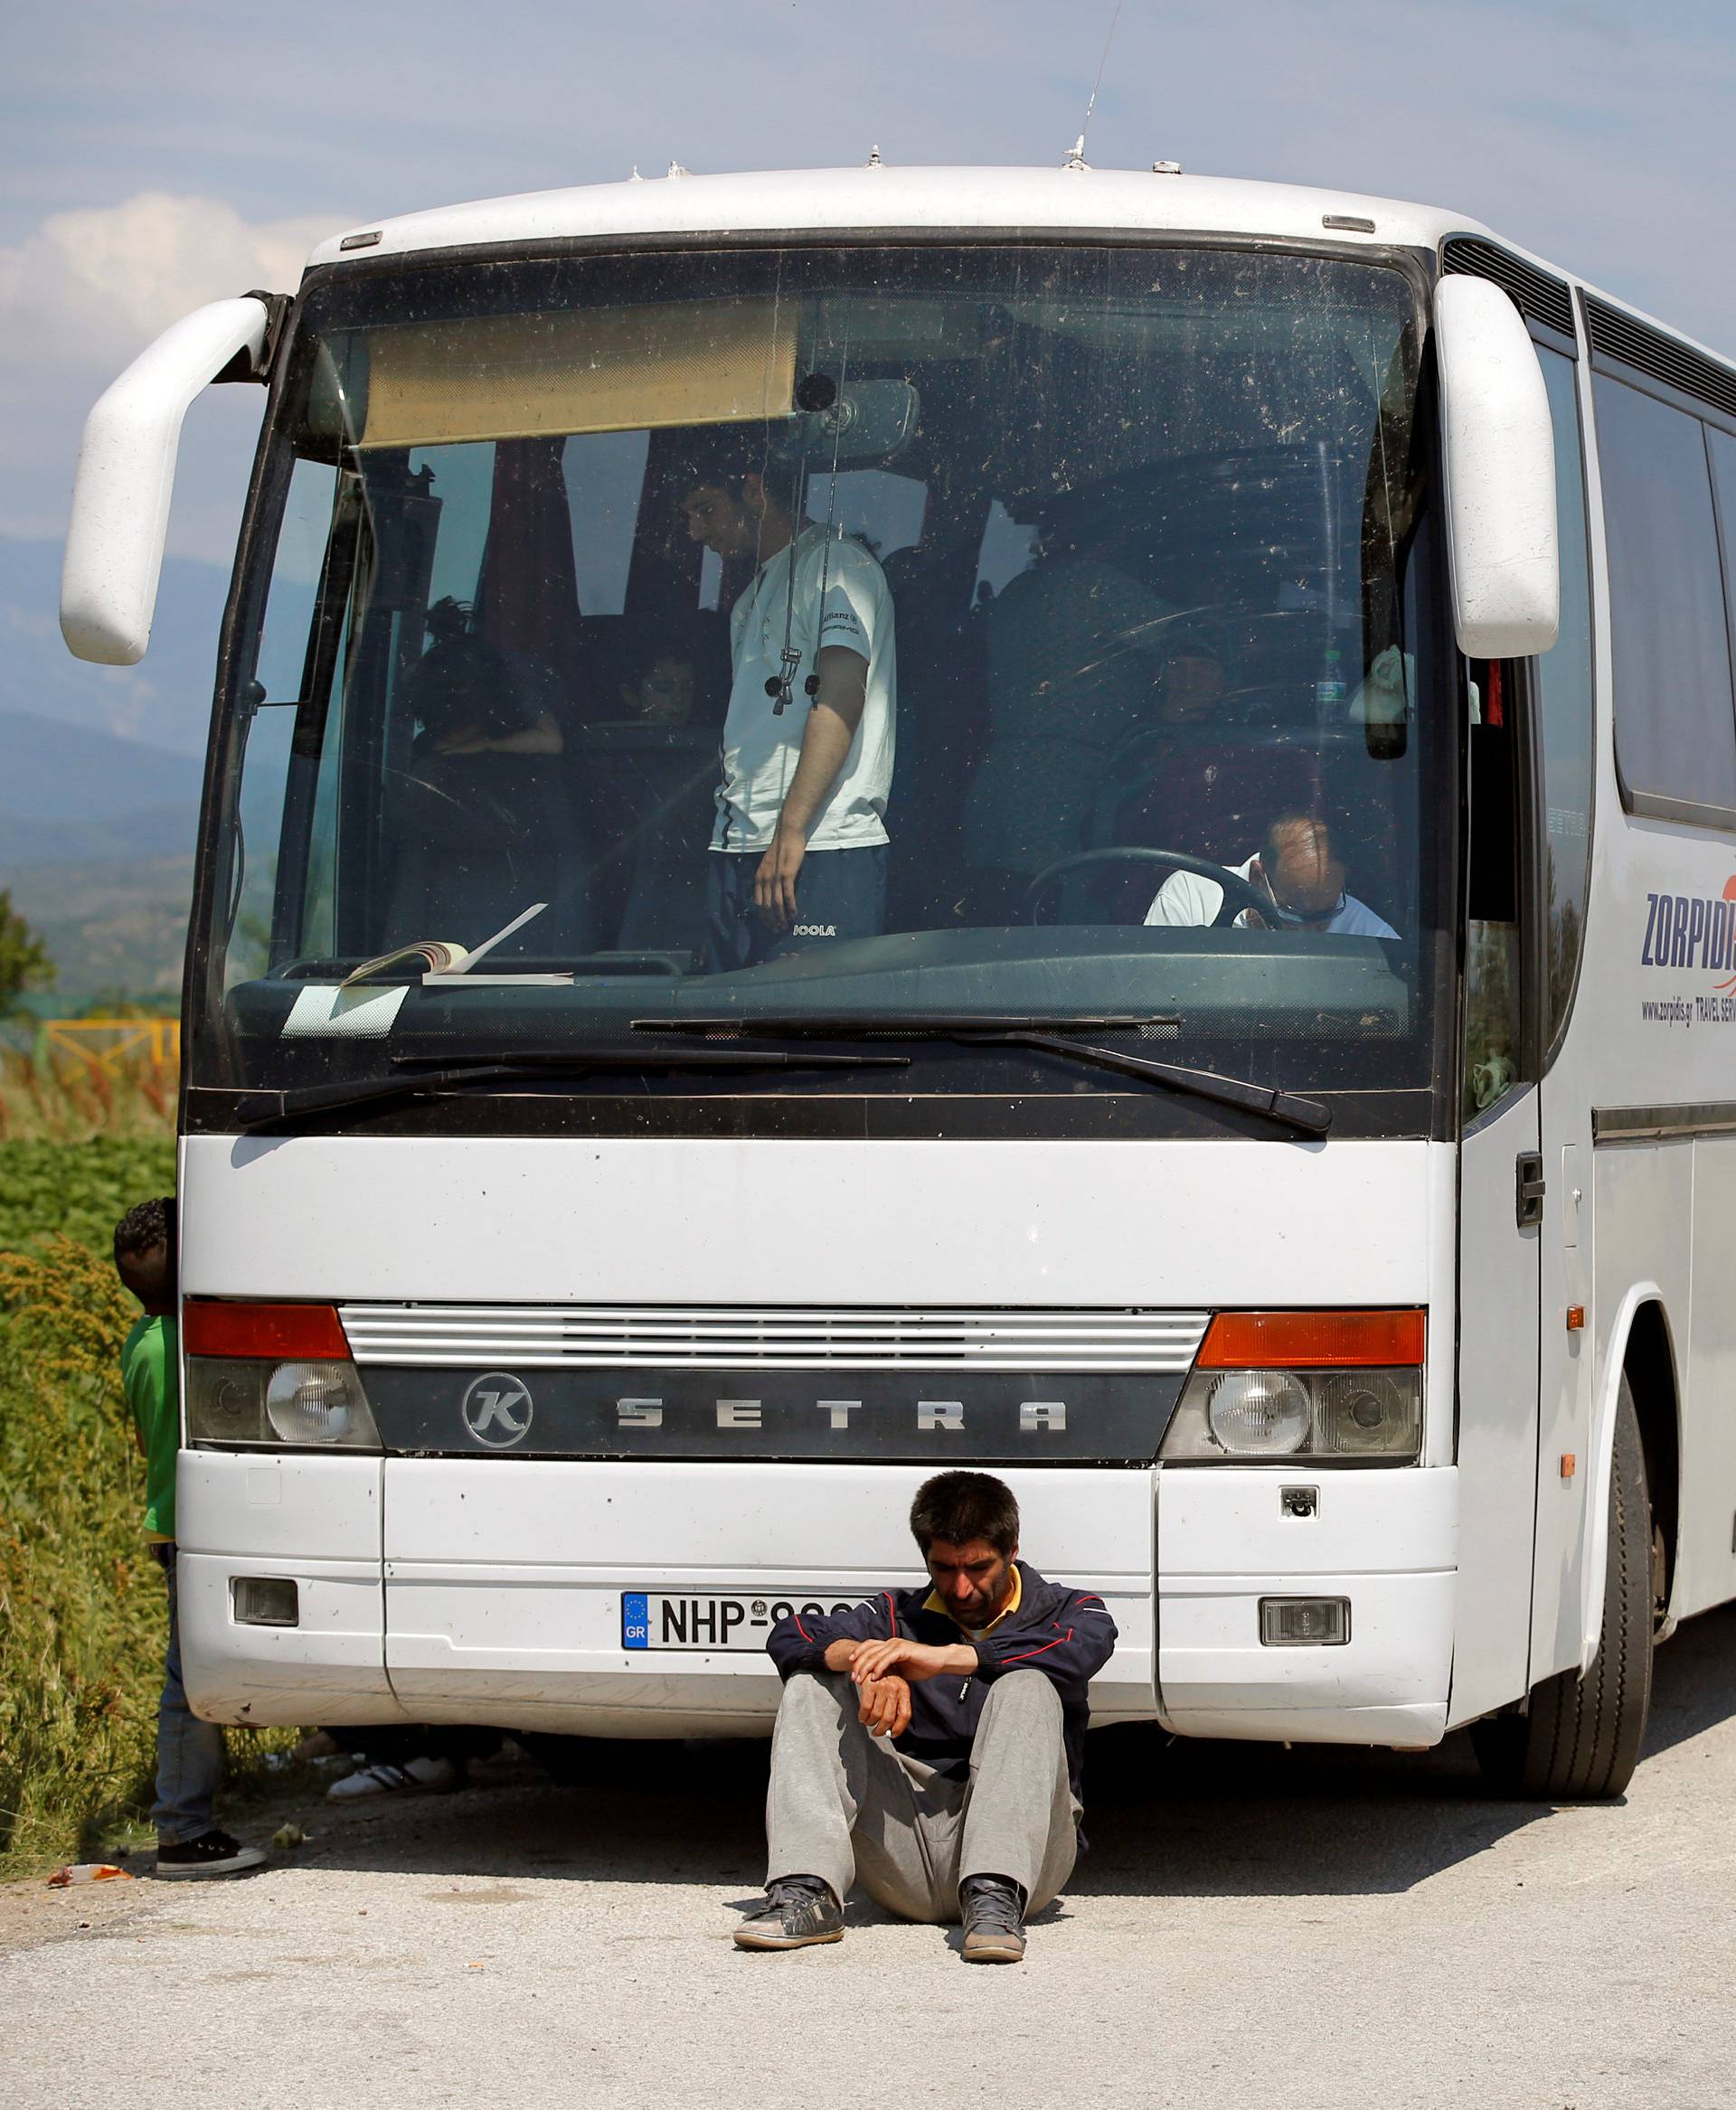 A migrant sits in front of a bus during a police operation to evacuate a migrants' makeshift camp at the Greek-Macedonian border near the village of Idomeni